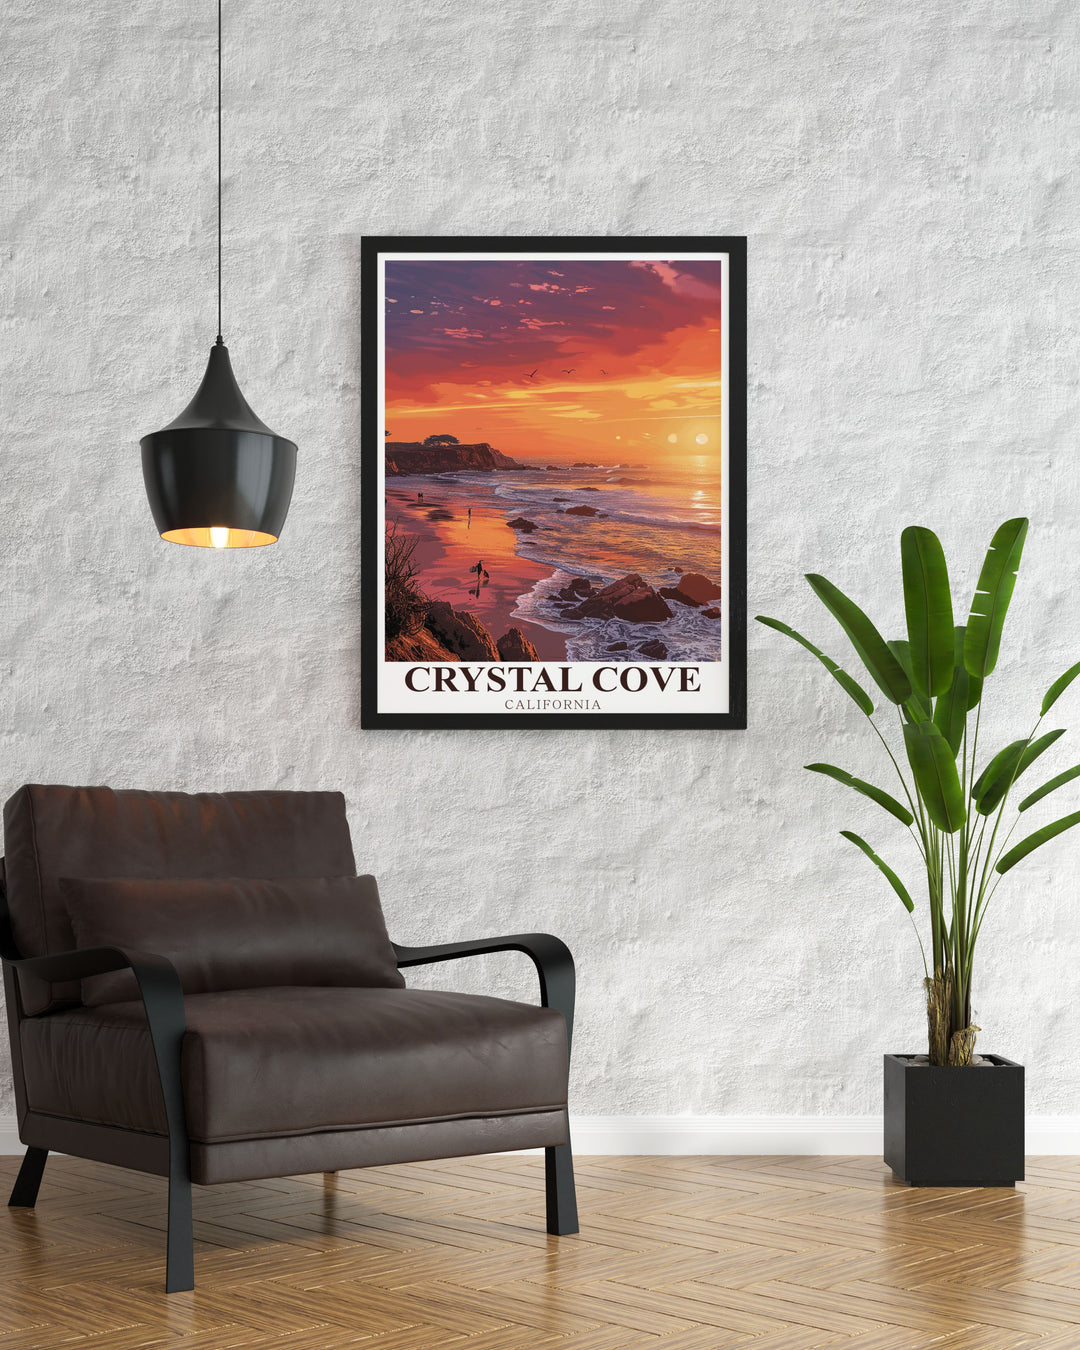 Looking for a unique gift? Crystal Cove Beach posters are a thoughtful and beautiful present for friends and family capturing the serene charm of the California coast and offering a timeless piece of art for any home.